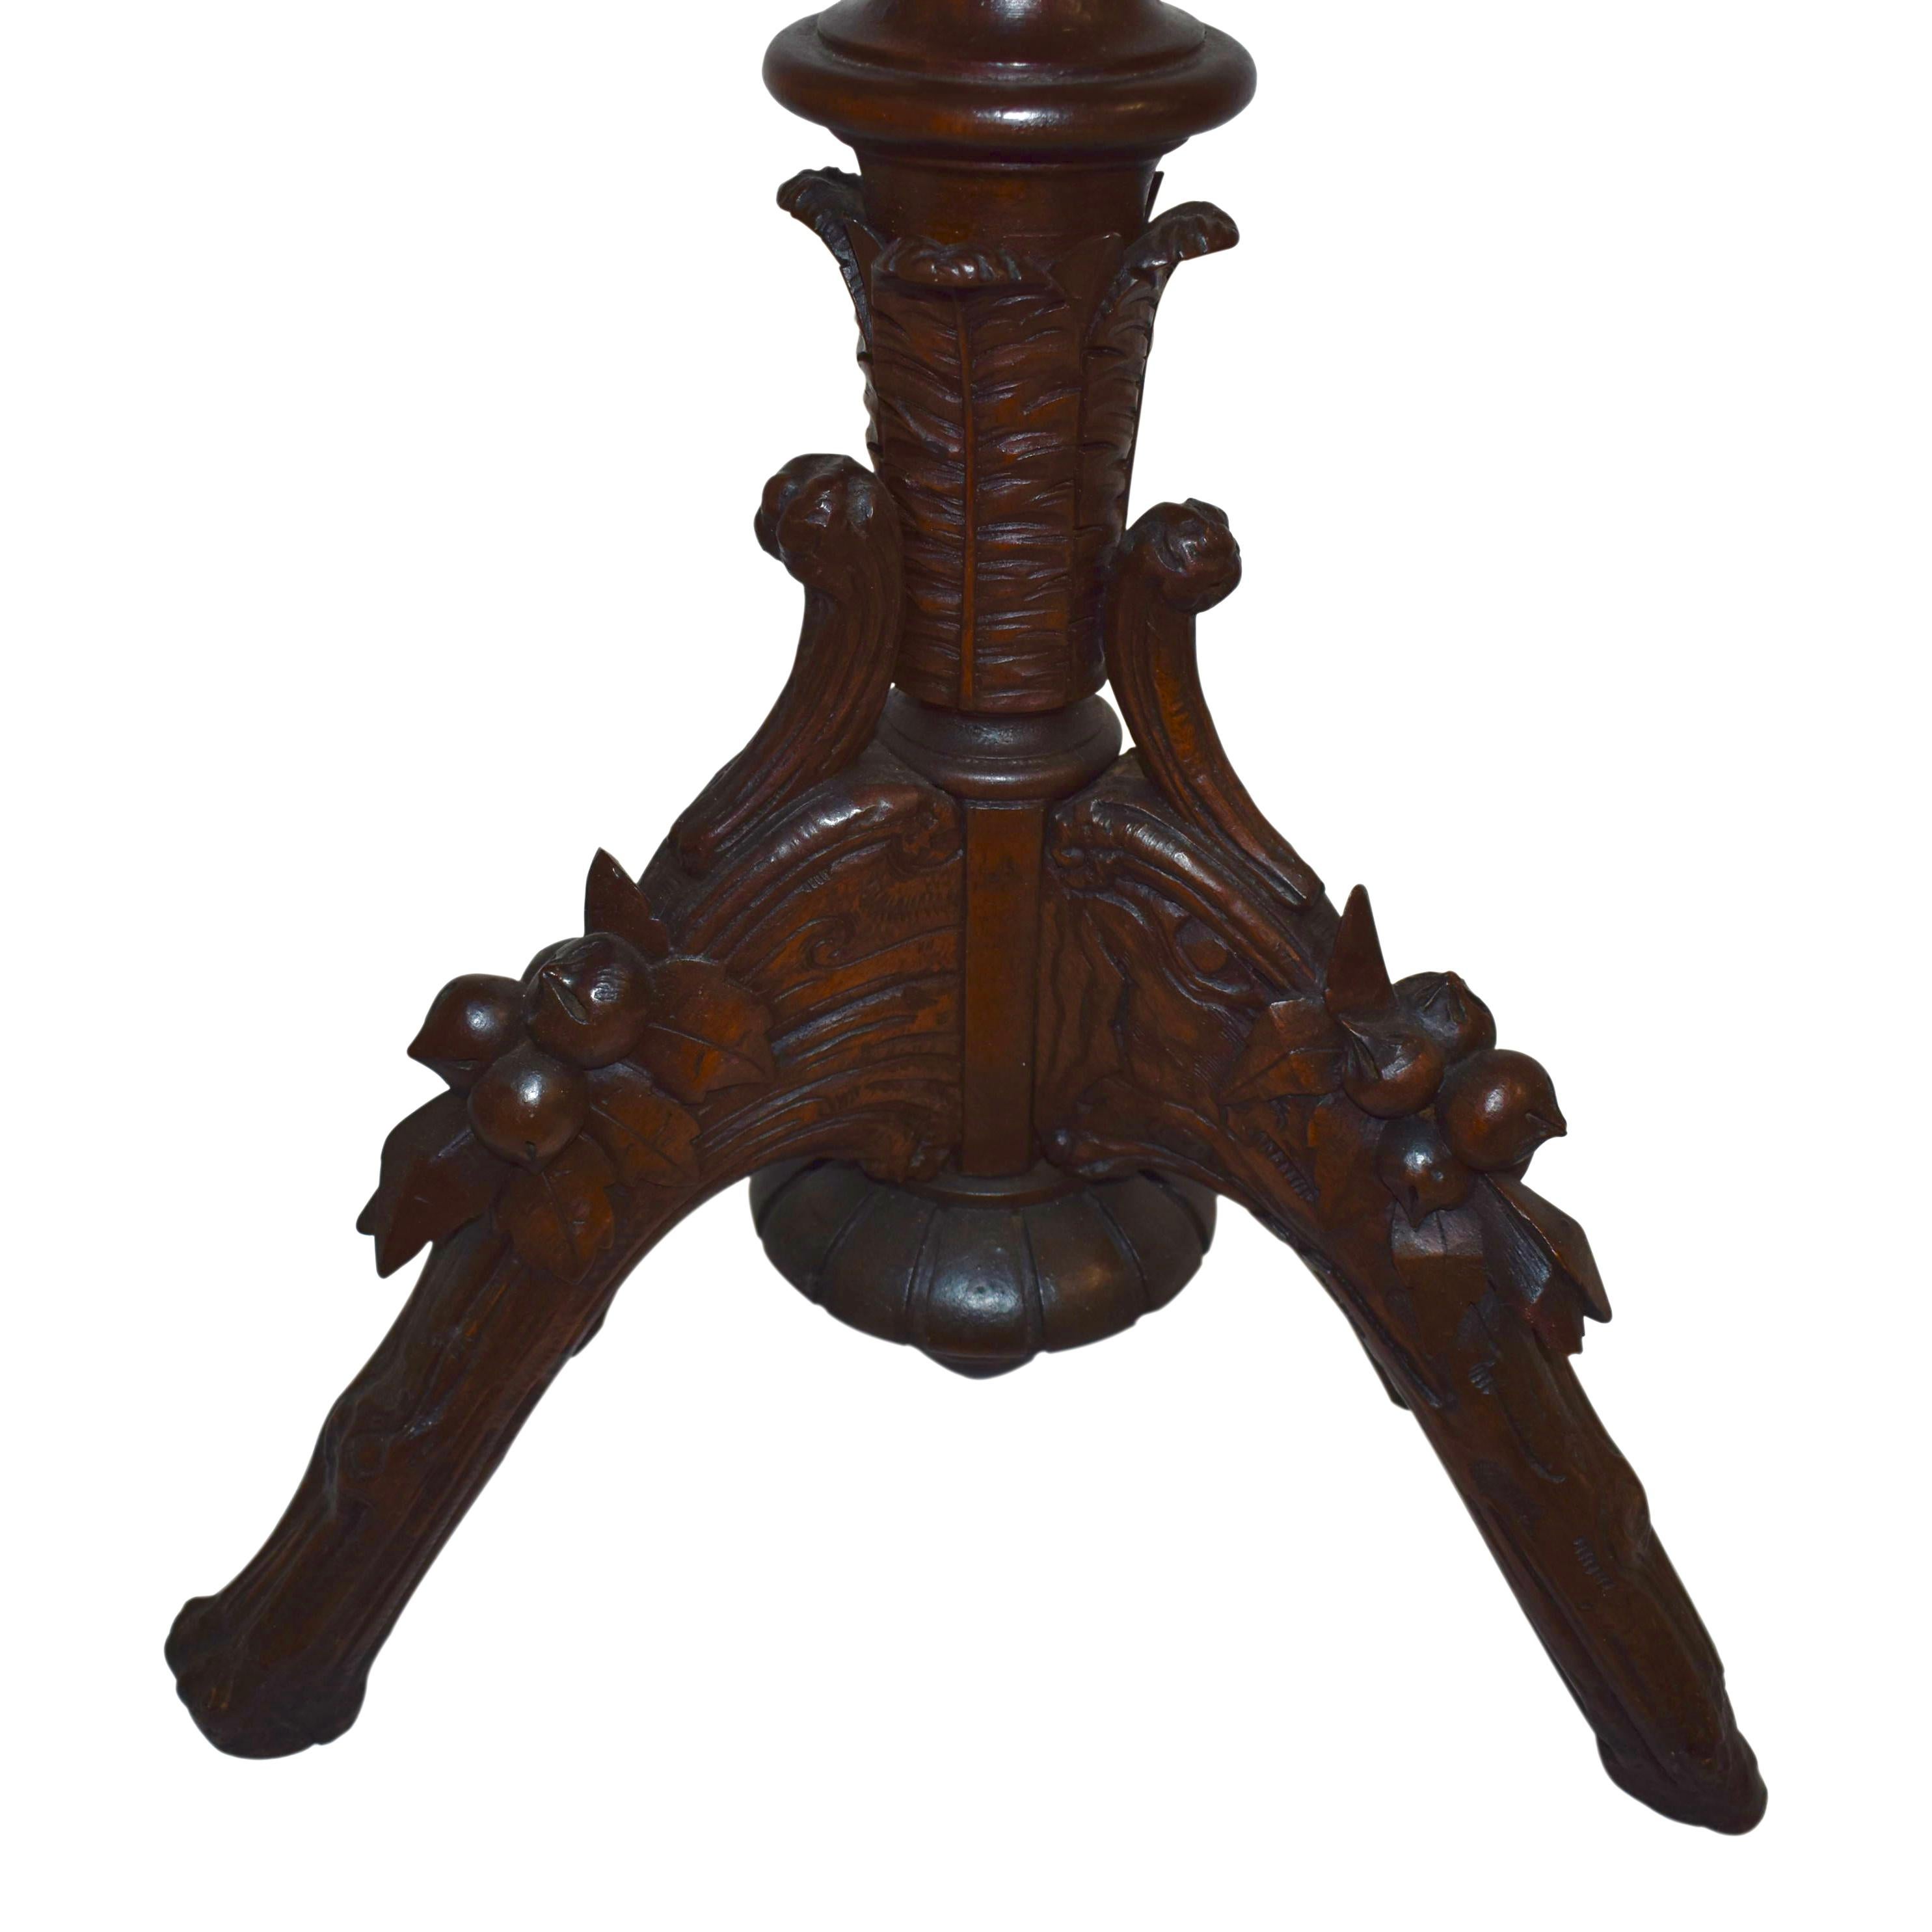 Swiss Black Forest Carved Wooden Planter Box / Jardinière, circa 1895 For Sale 5